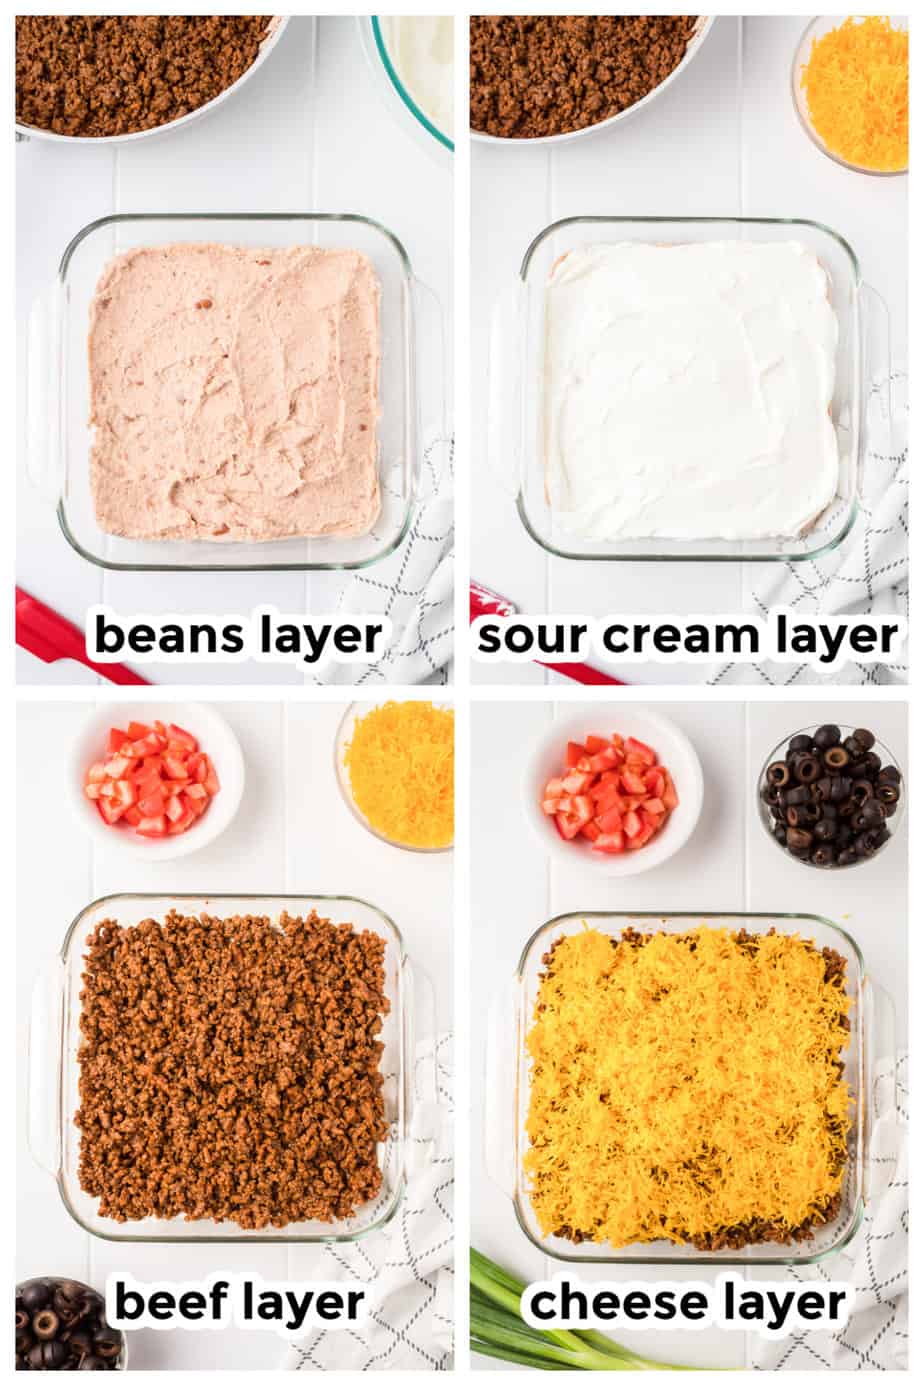 Collage showing step by step layering refried bean, sour cream, beef and cheese layers in a square pan on the counter from above.